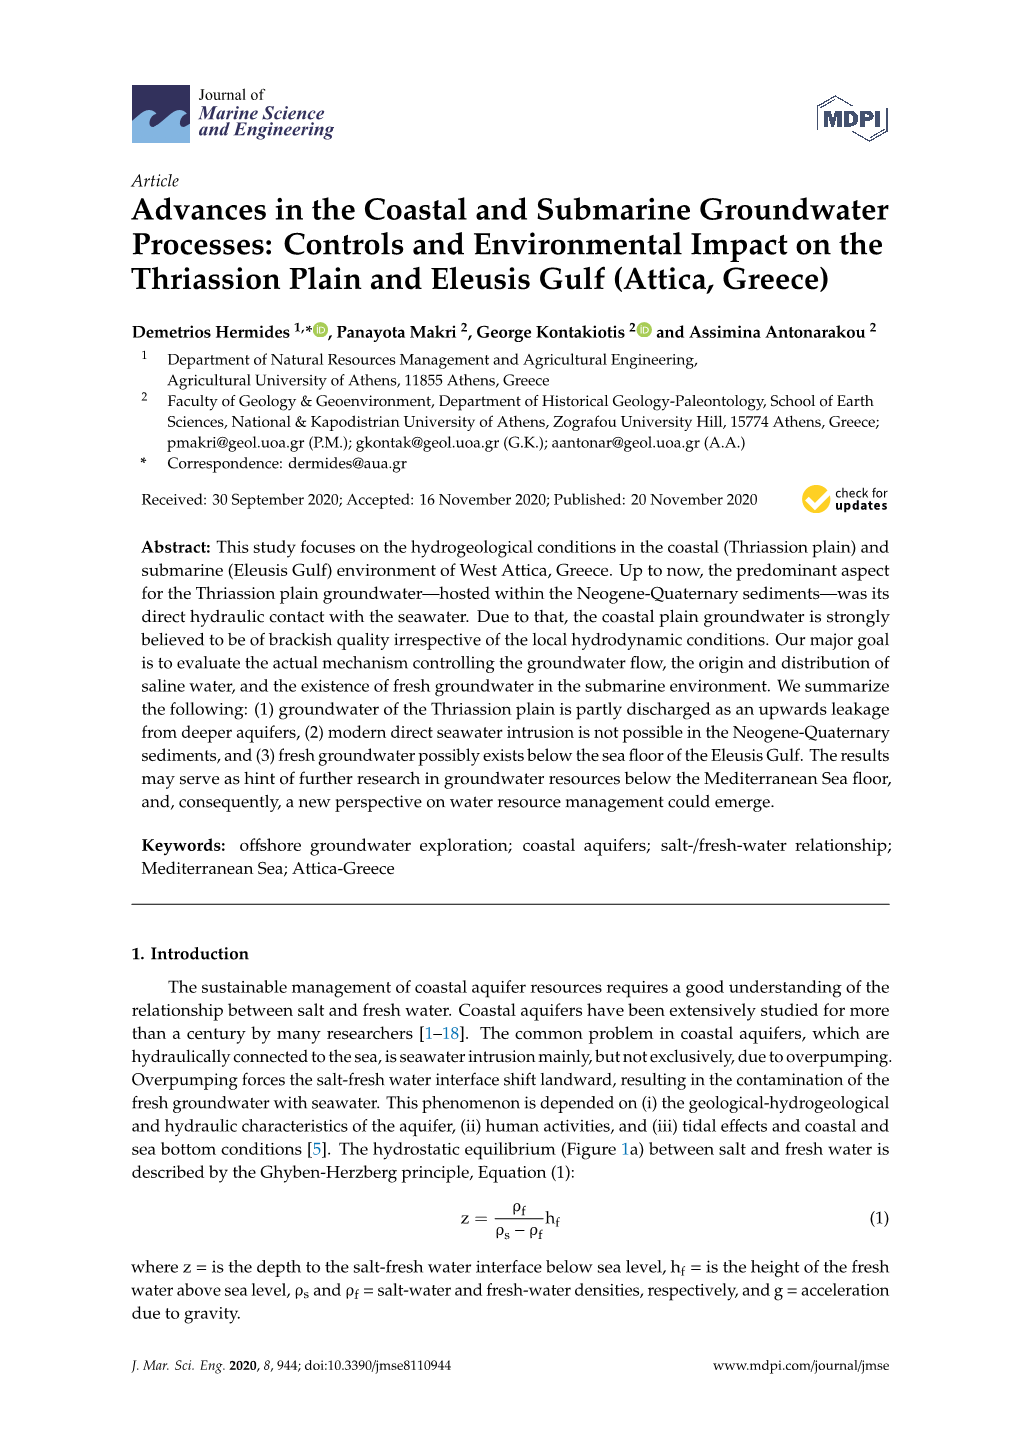 Advances in the Coastal and Submarine Groundwater Processes: Controls and Environmental Impact on the Thriassion Plain and Eleusis Gulf (Attica, Greece)